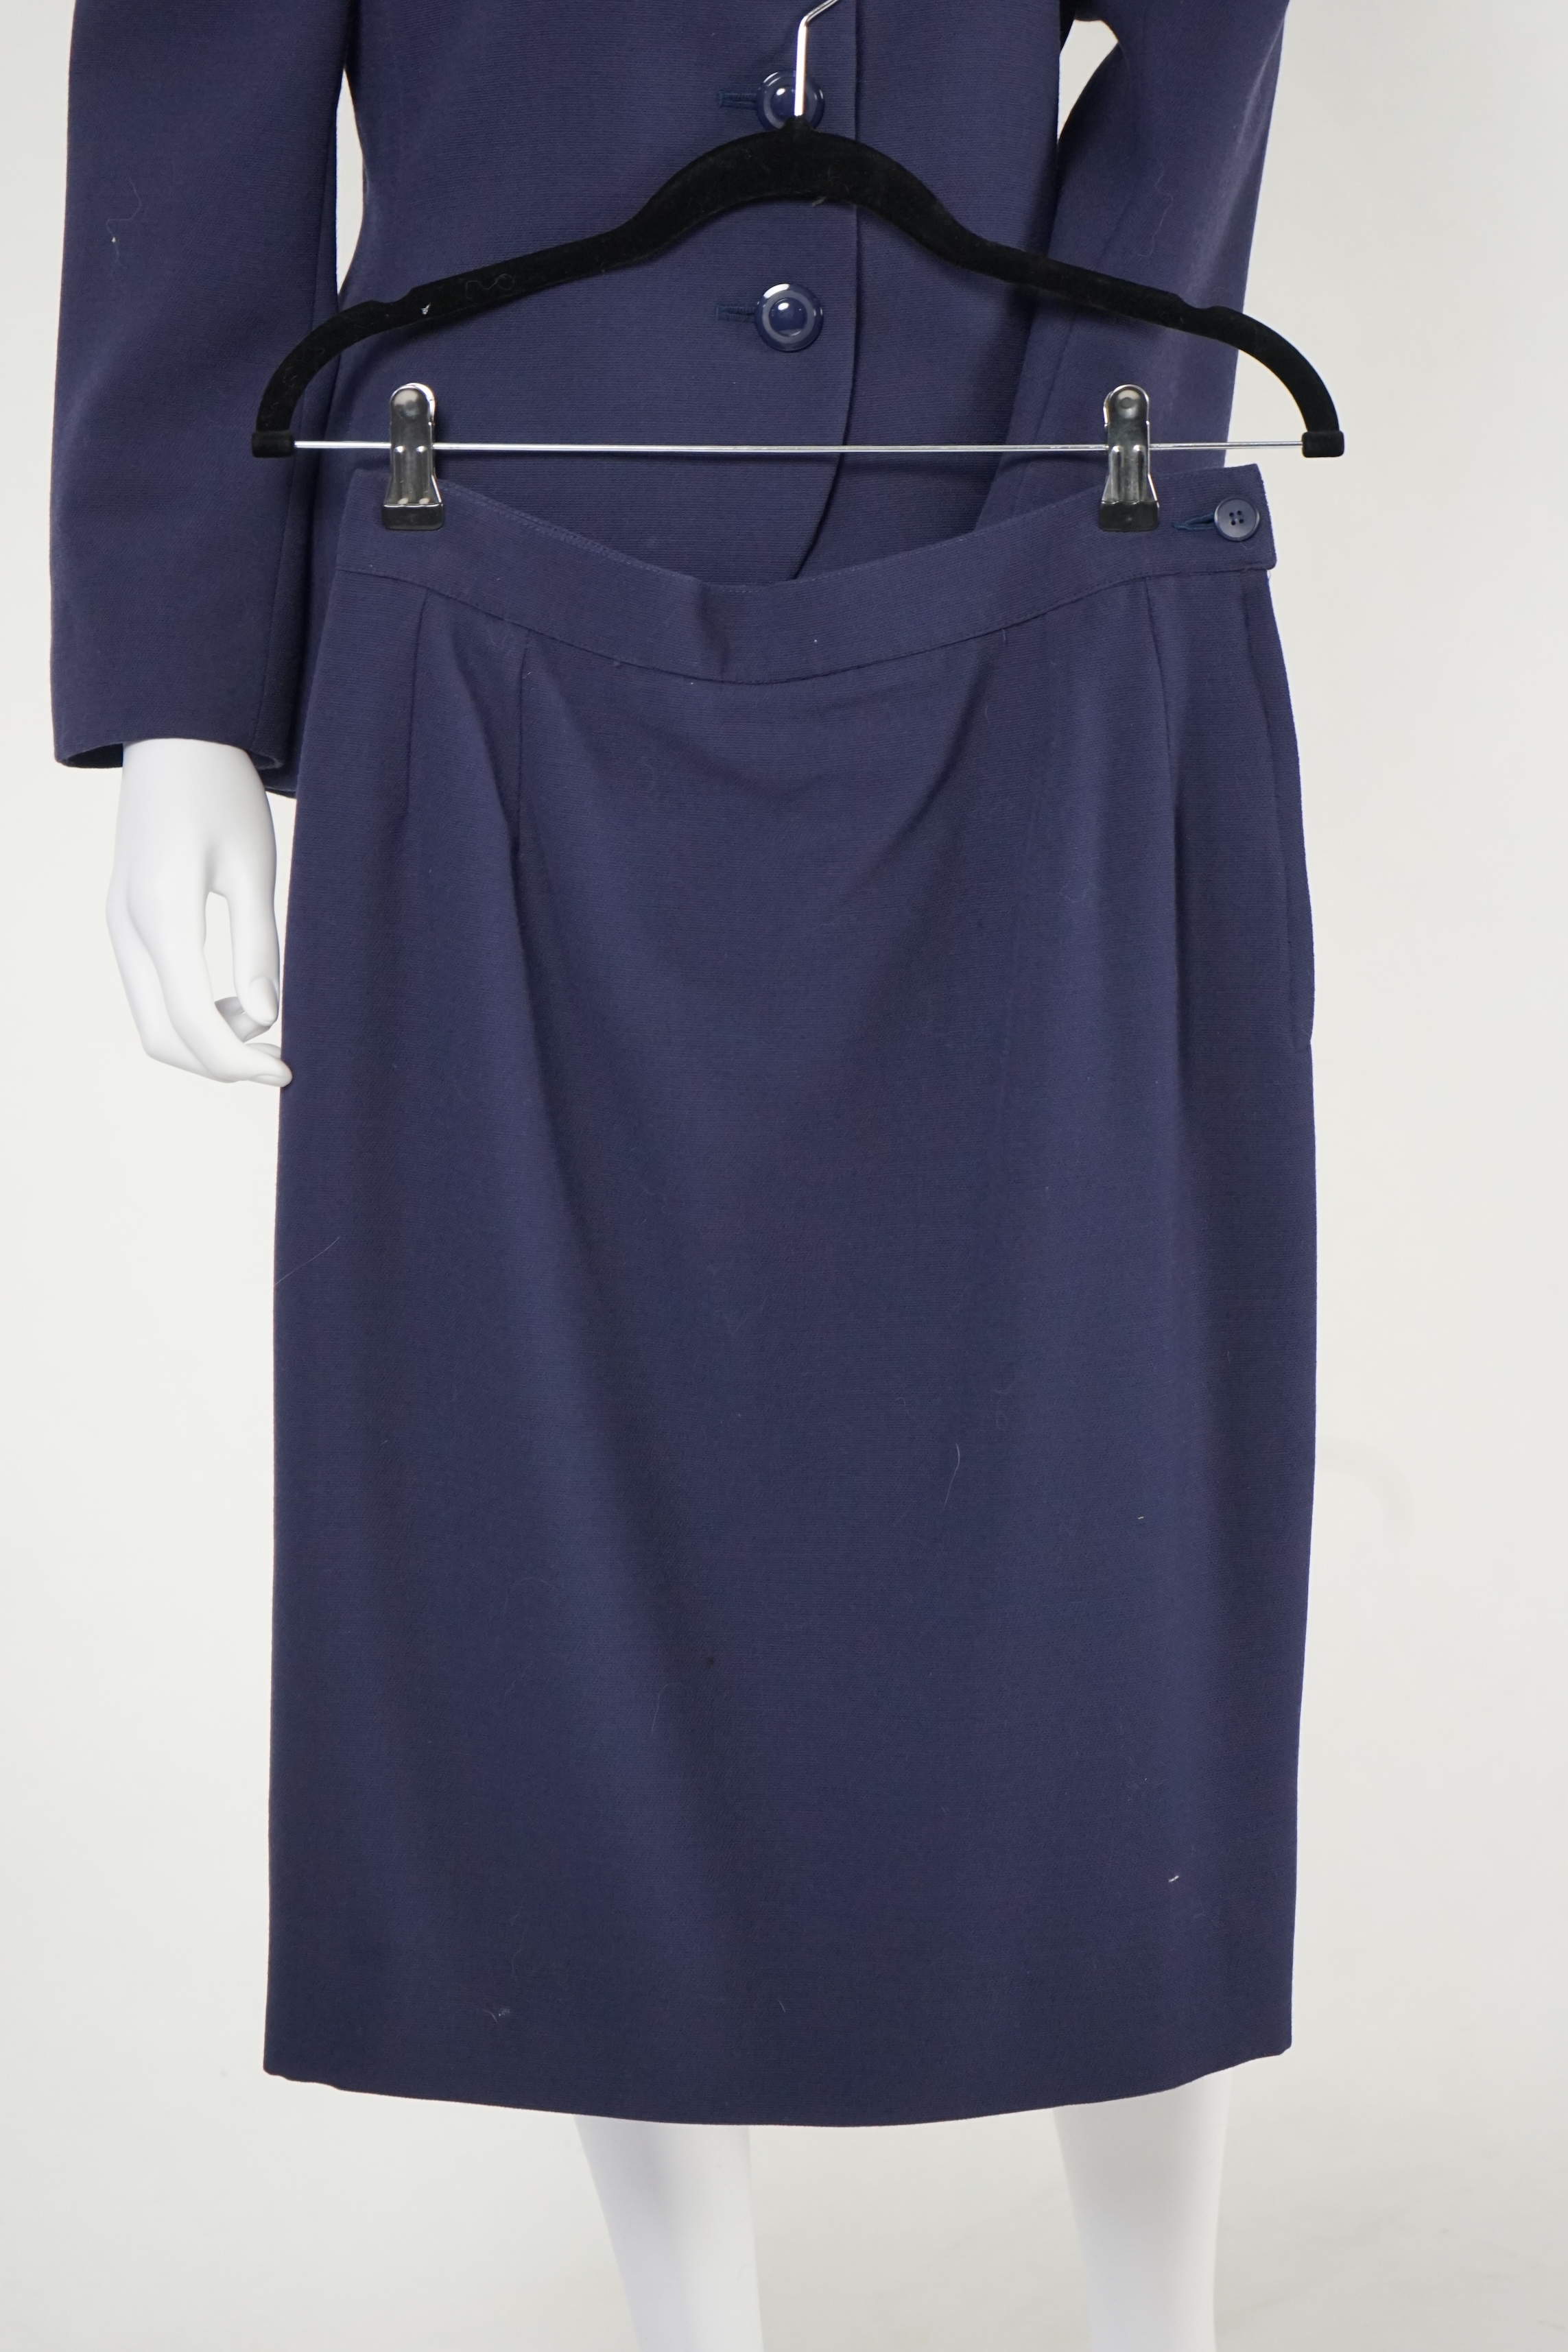 A vintage Yves Saint Laurent variation lady's navy wool skirt suit, F 42 (UK 14).Please note alterations to make the waist smaller may have been carried out on some of the skirts. Proceeds to Happy Paws Puppy Rescue.